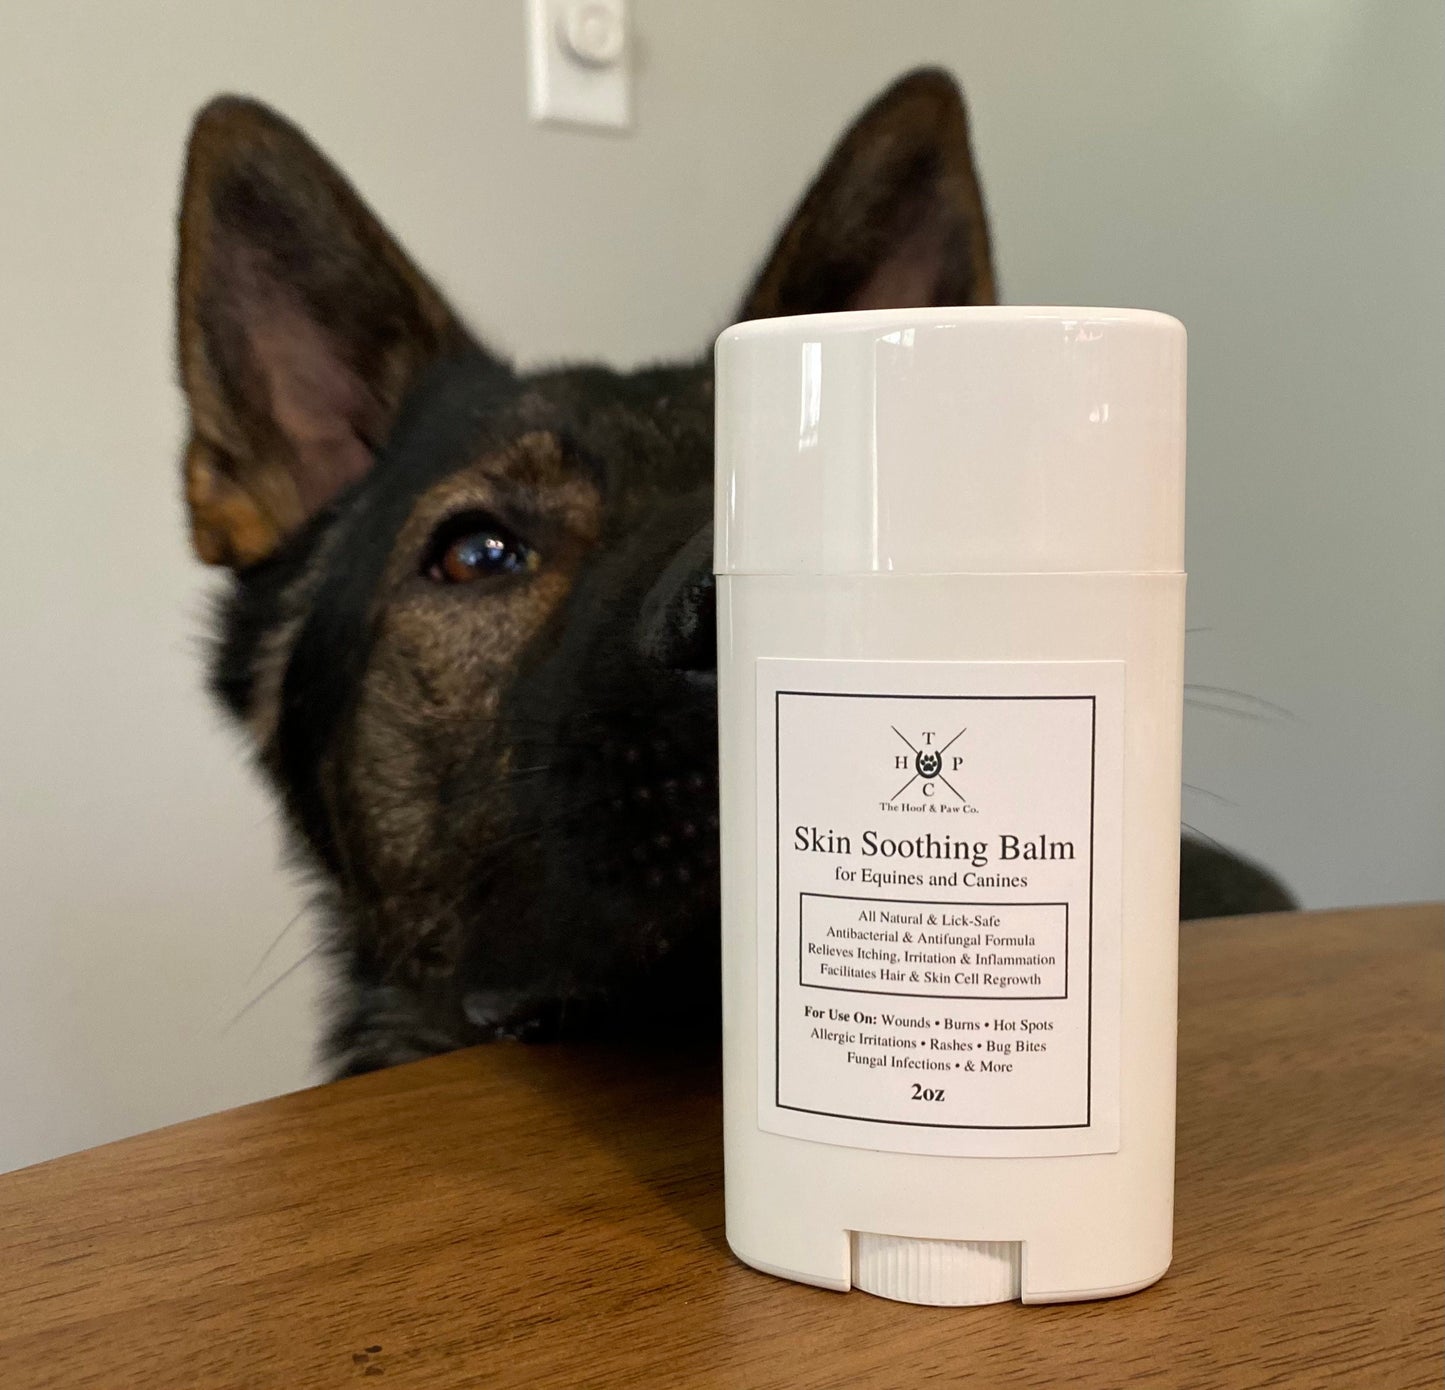 All Natural Skin Soothing Balm - For Dogs & Horses - 2oz